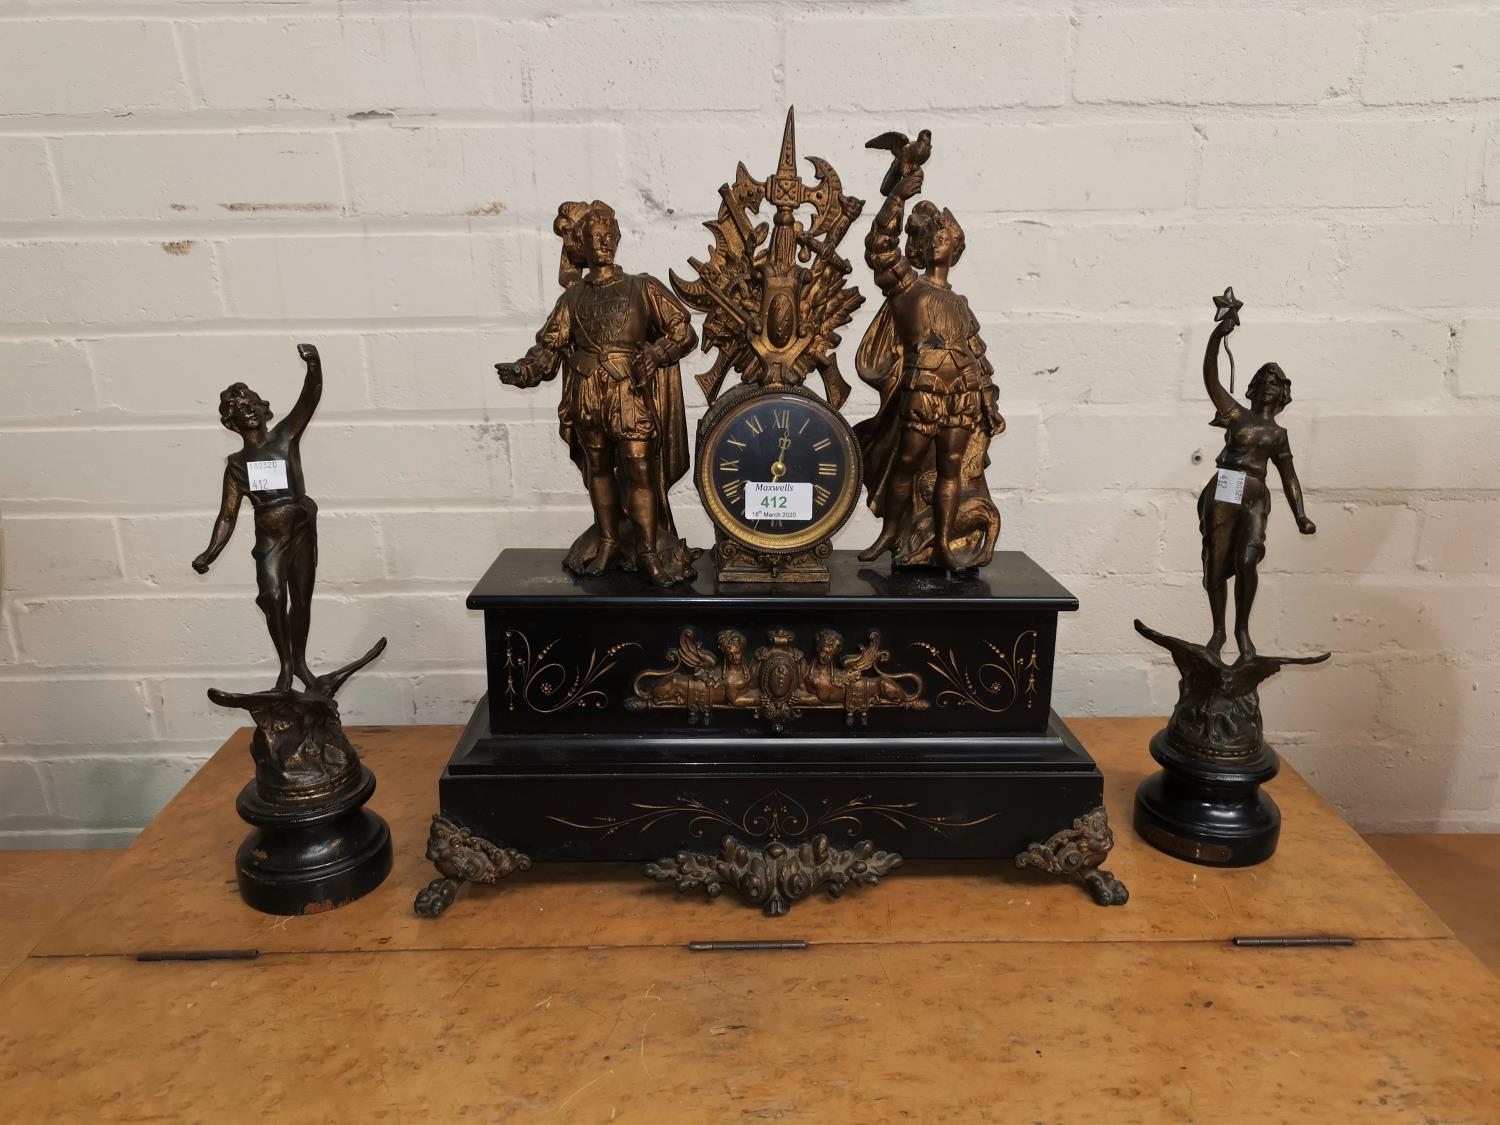 A 19th century clock garniture in black marble and gilt, the clock surmounted by 2 figures, with